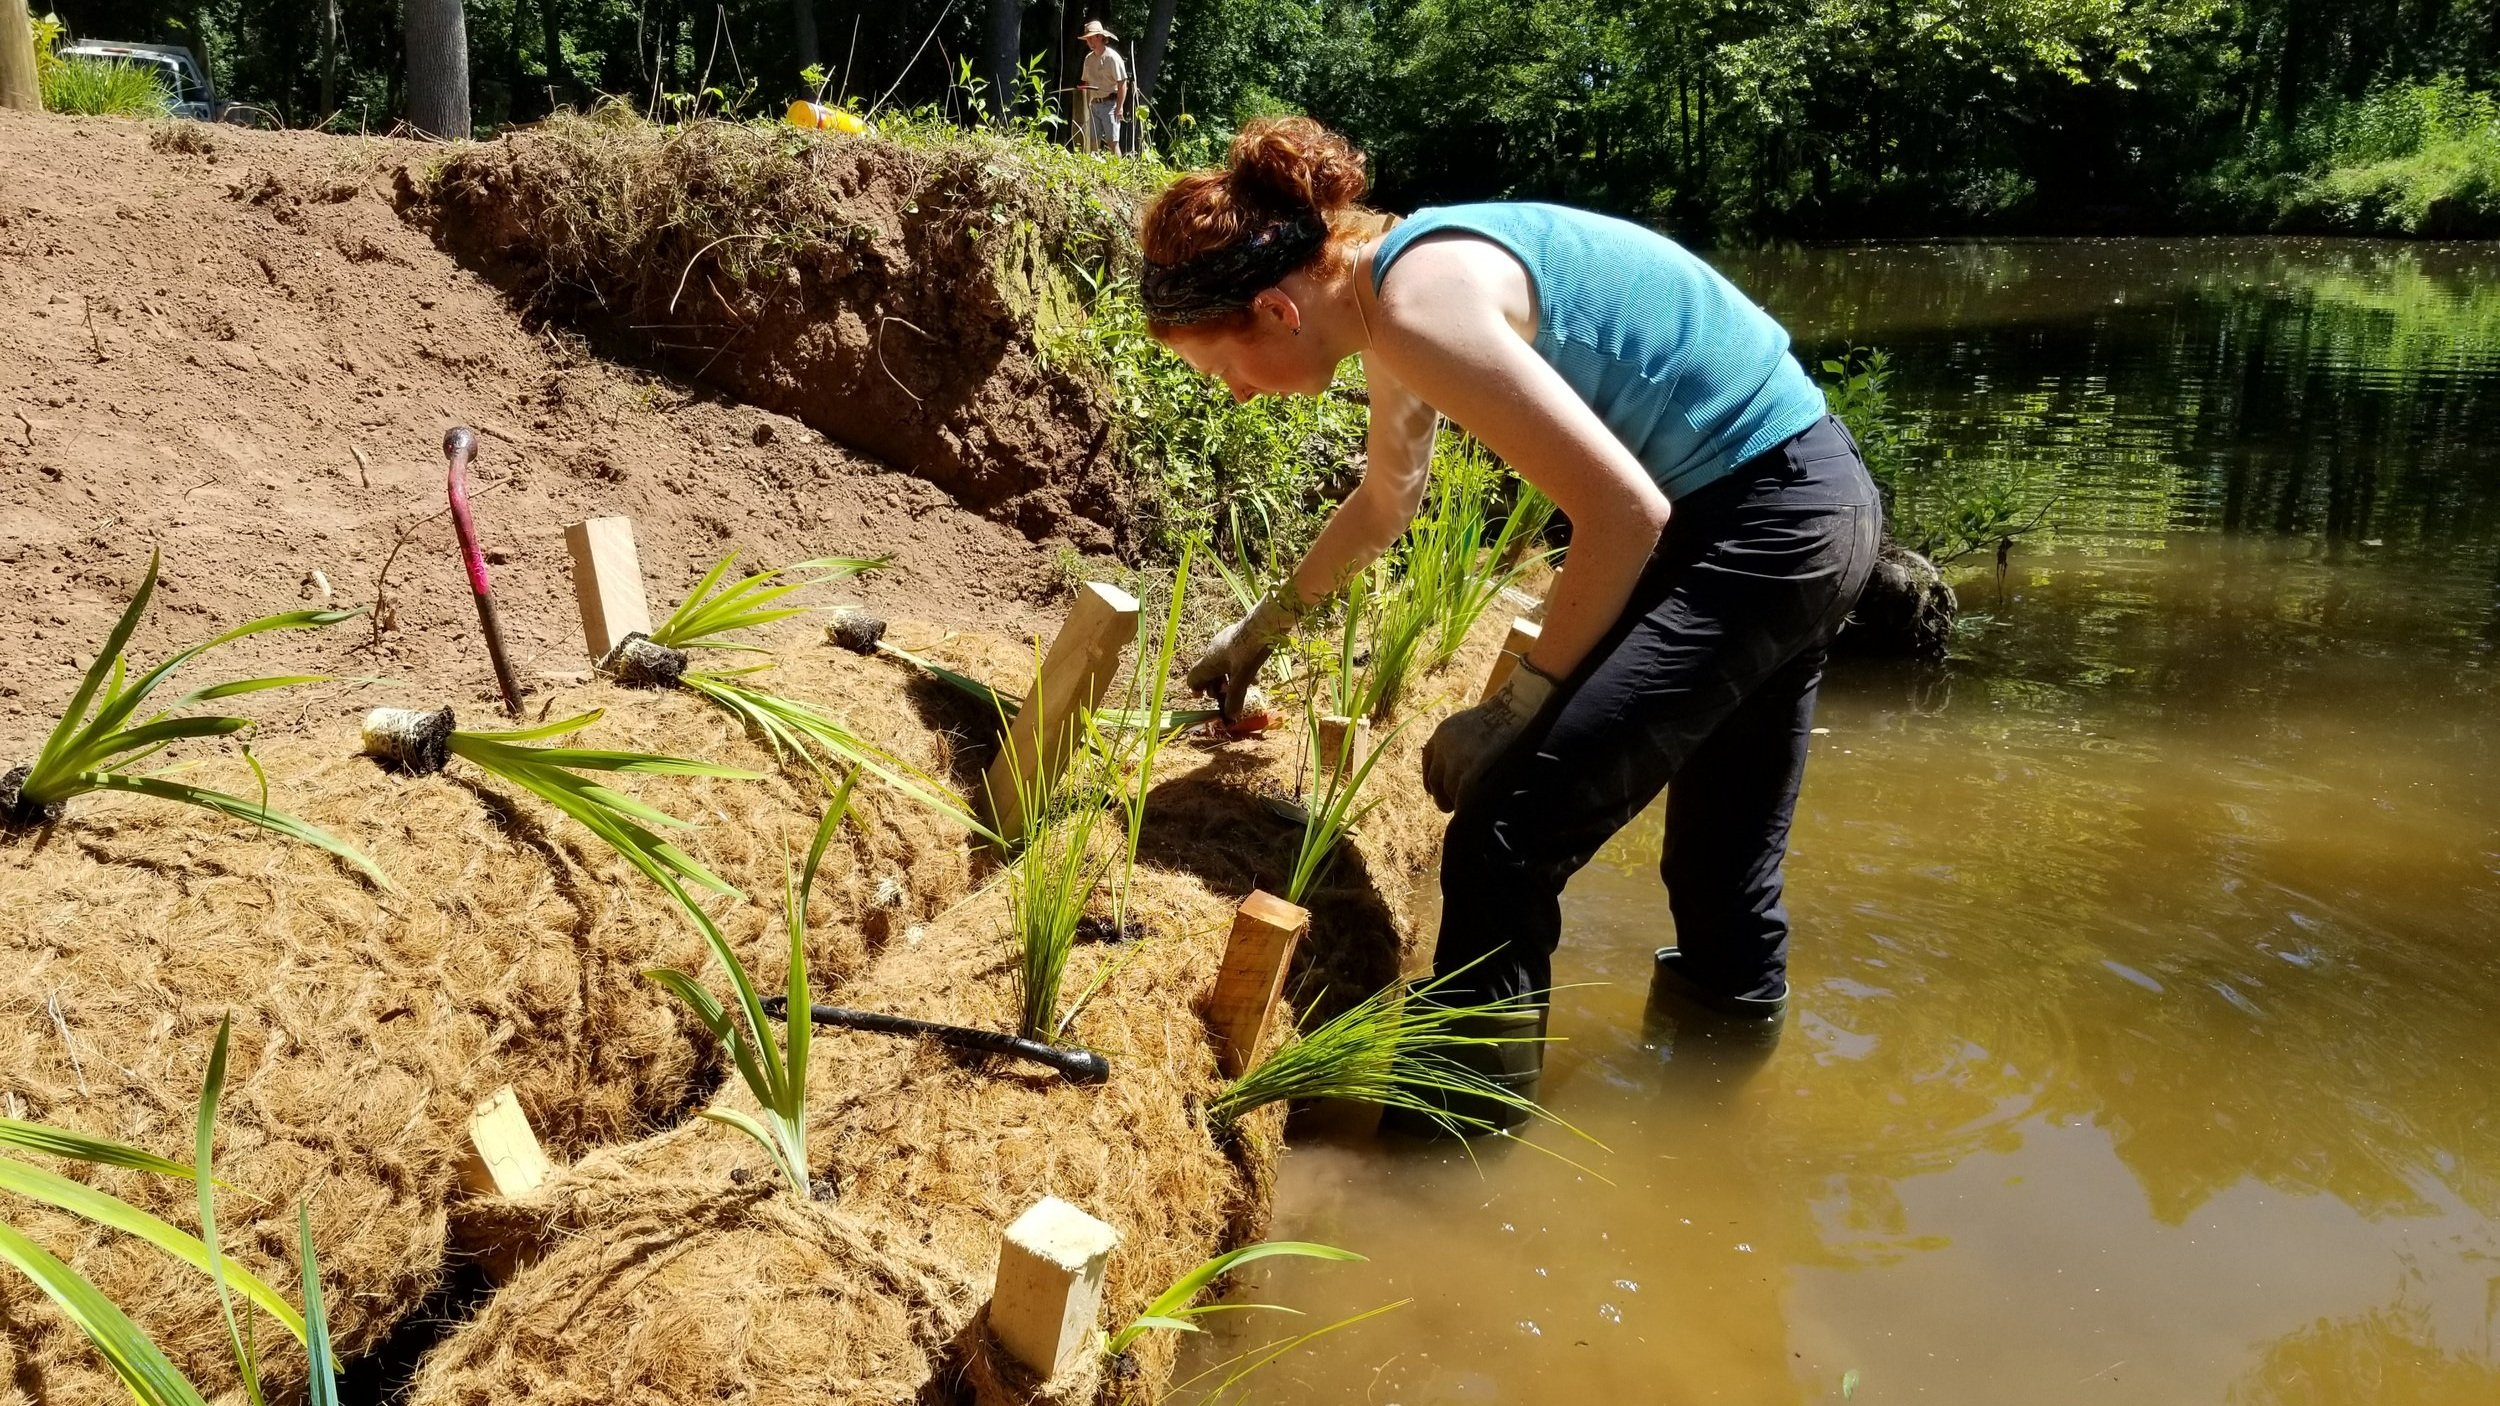 Ellie, a 2018 Steward Green intern and Rutgers student, plants biologs with native flora as part of a riparian buffer restoration project